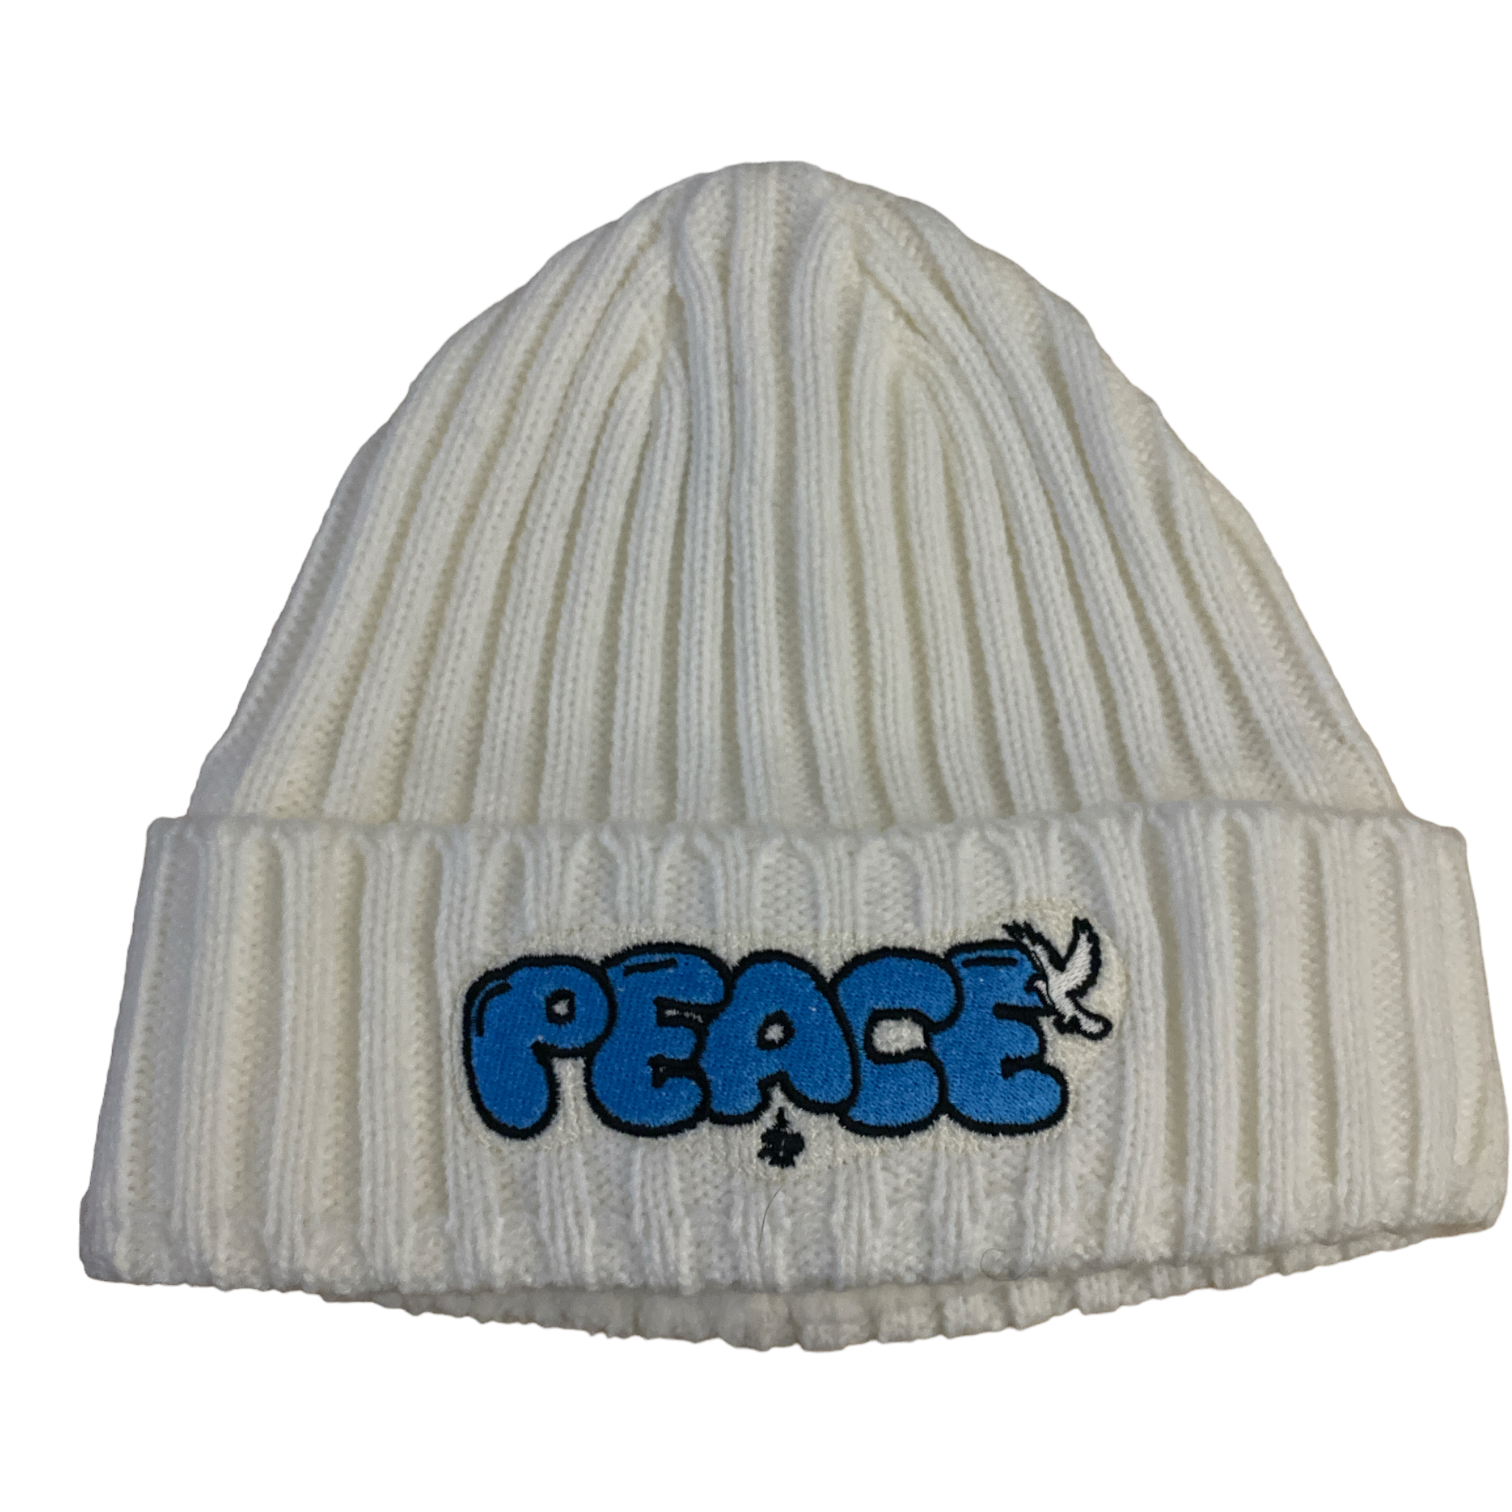 * New - Embroidered Lux Knit Peace Beanie -  Navy Blue & Oyster White - **Limited Release - TheSinners2Saints